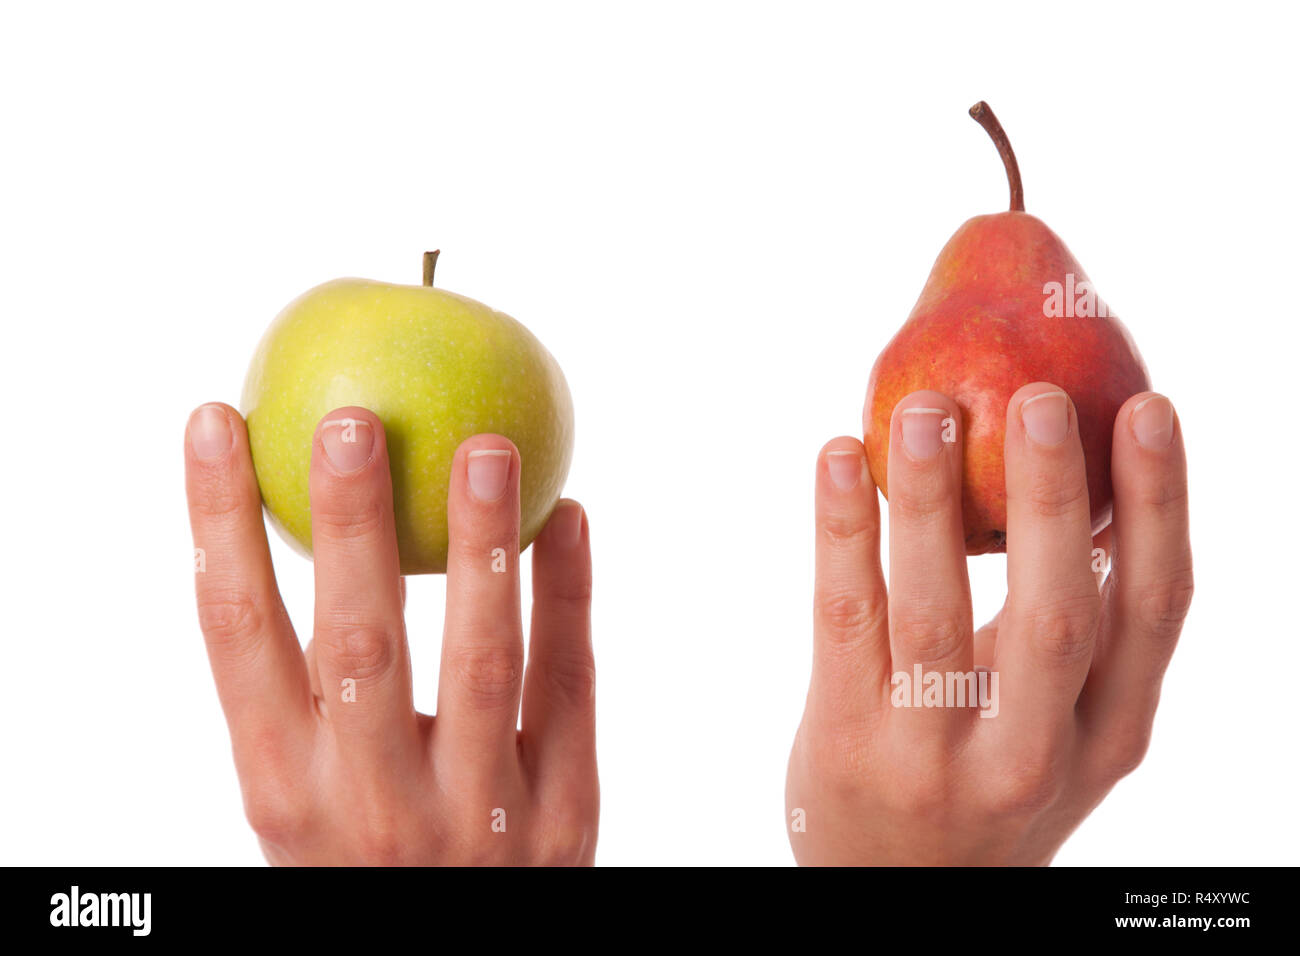 Comparison and differentiation of an apple and a pear Stock Photo